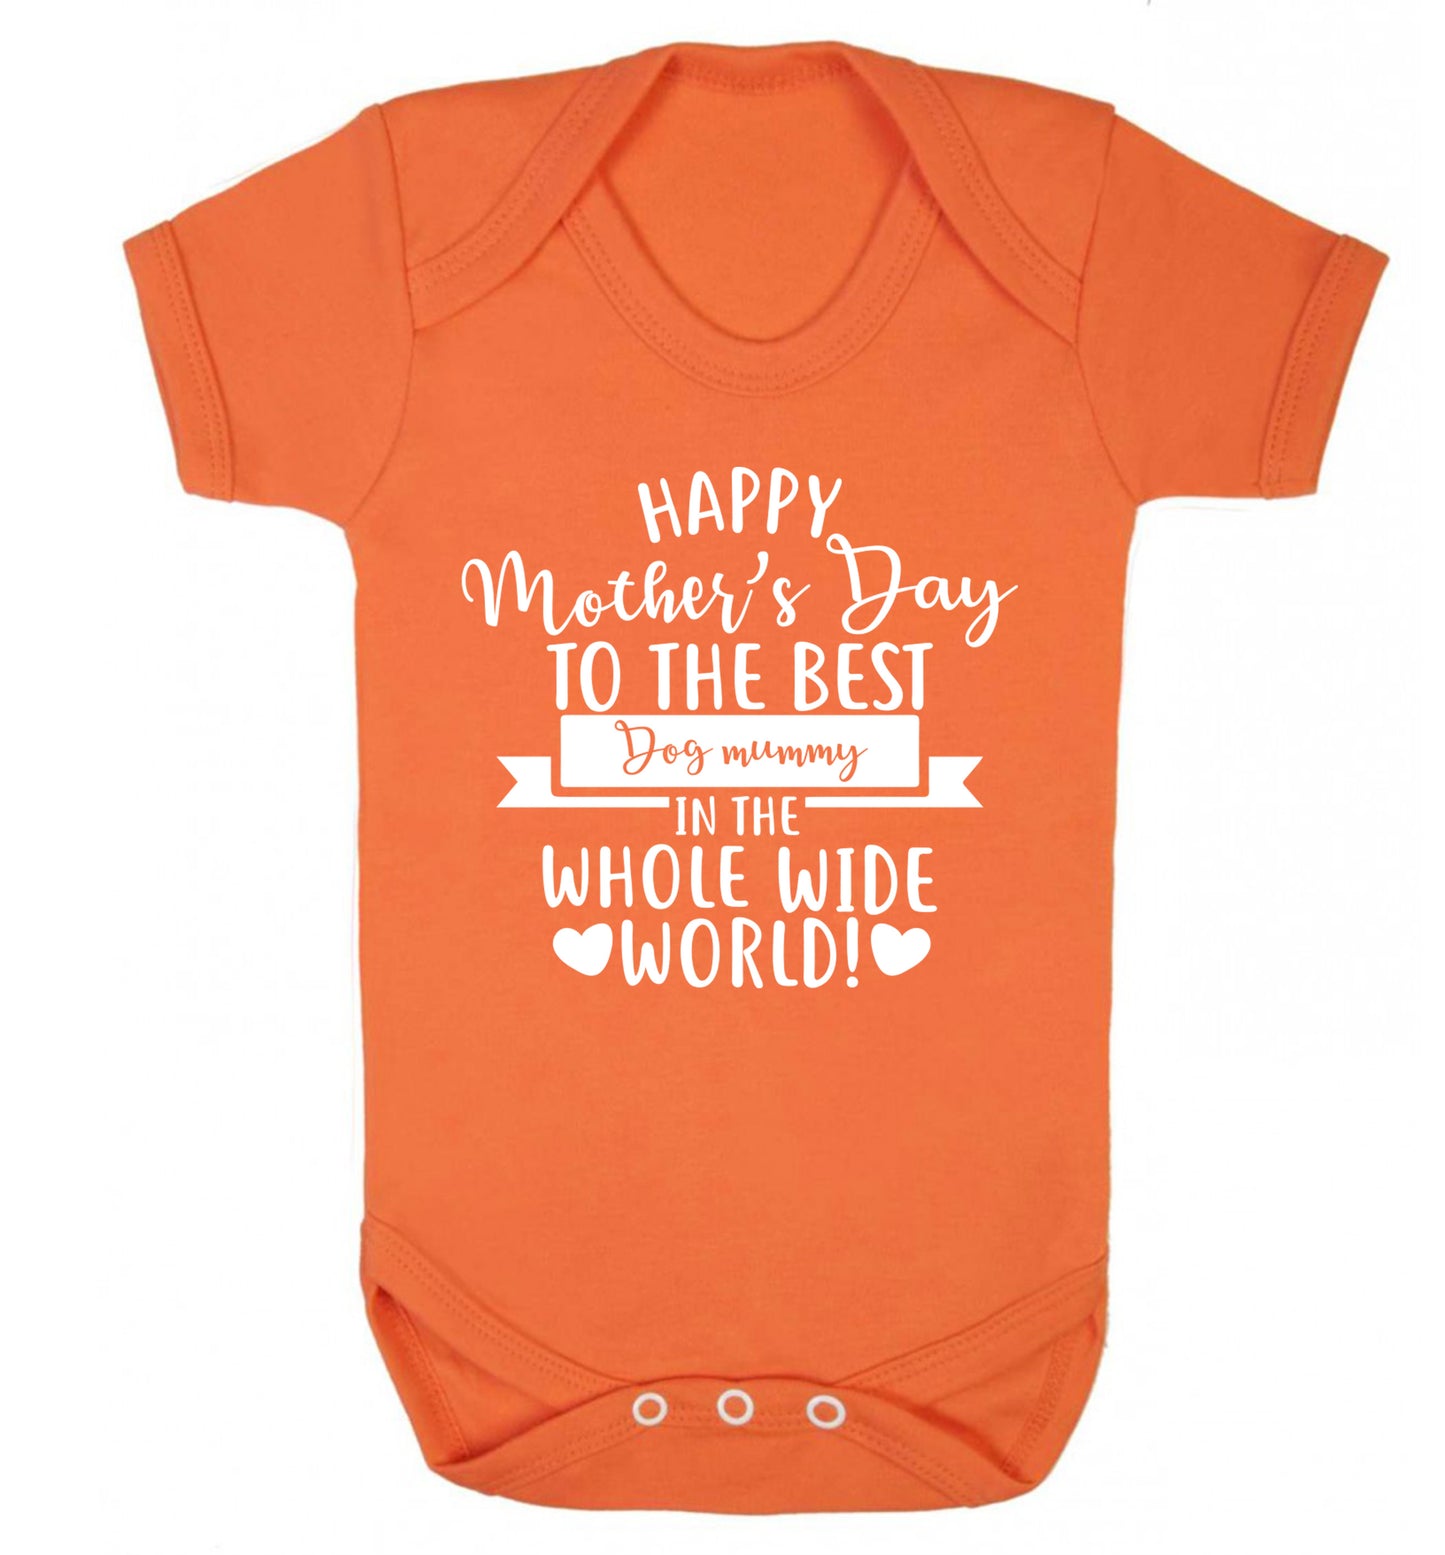 Happy mother's day to the best dog mummy in the world Baby Vest orange 18-24 months